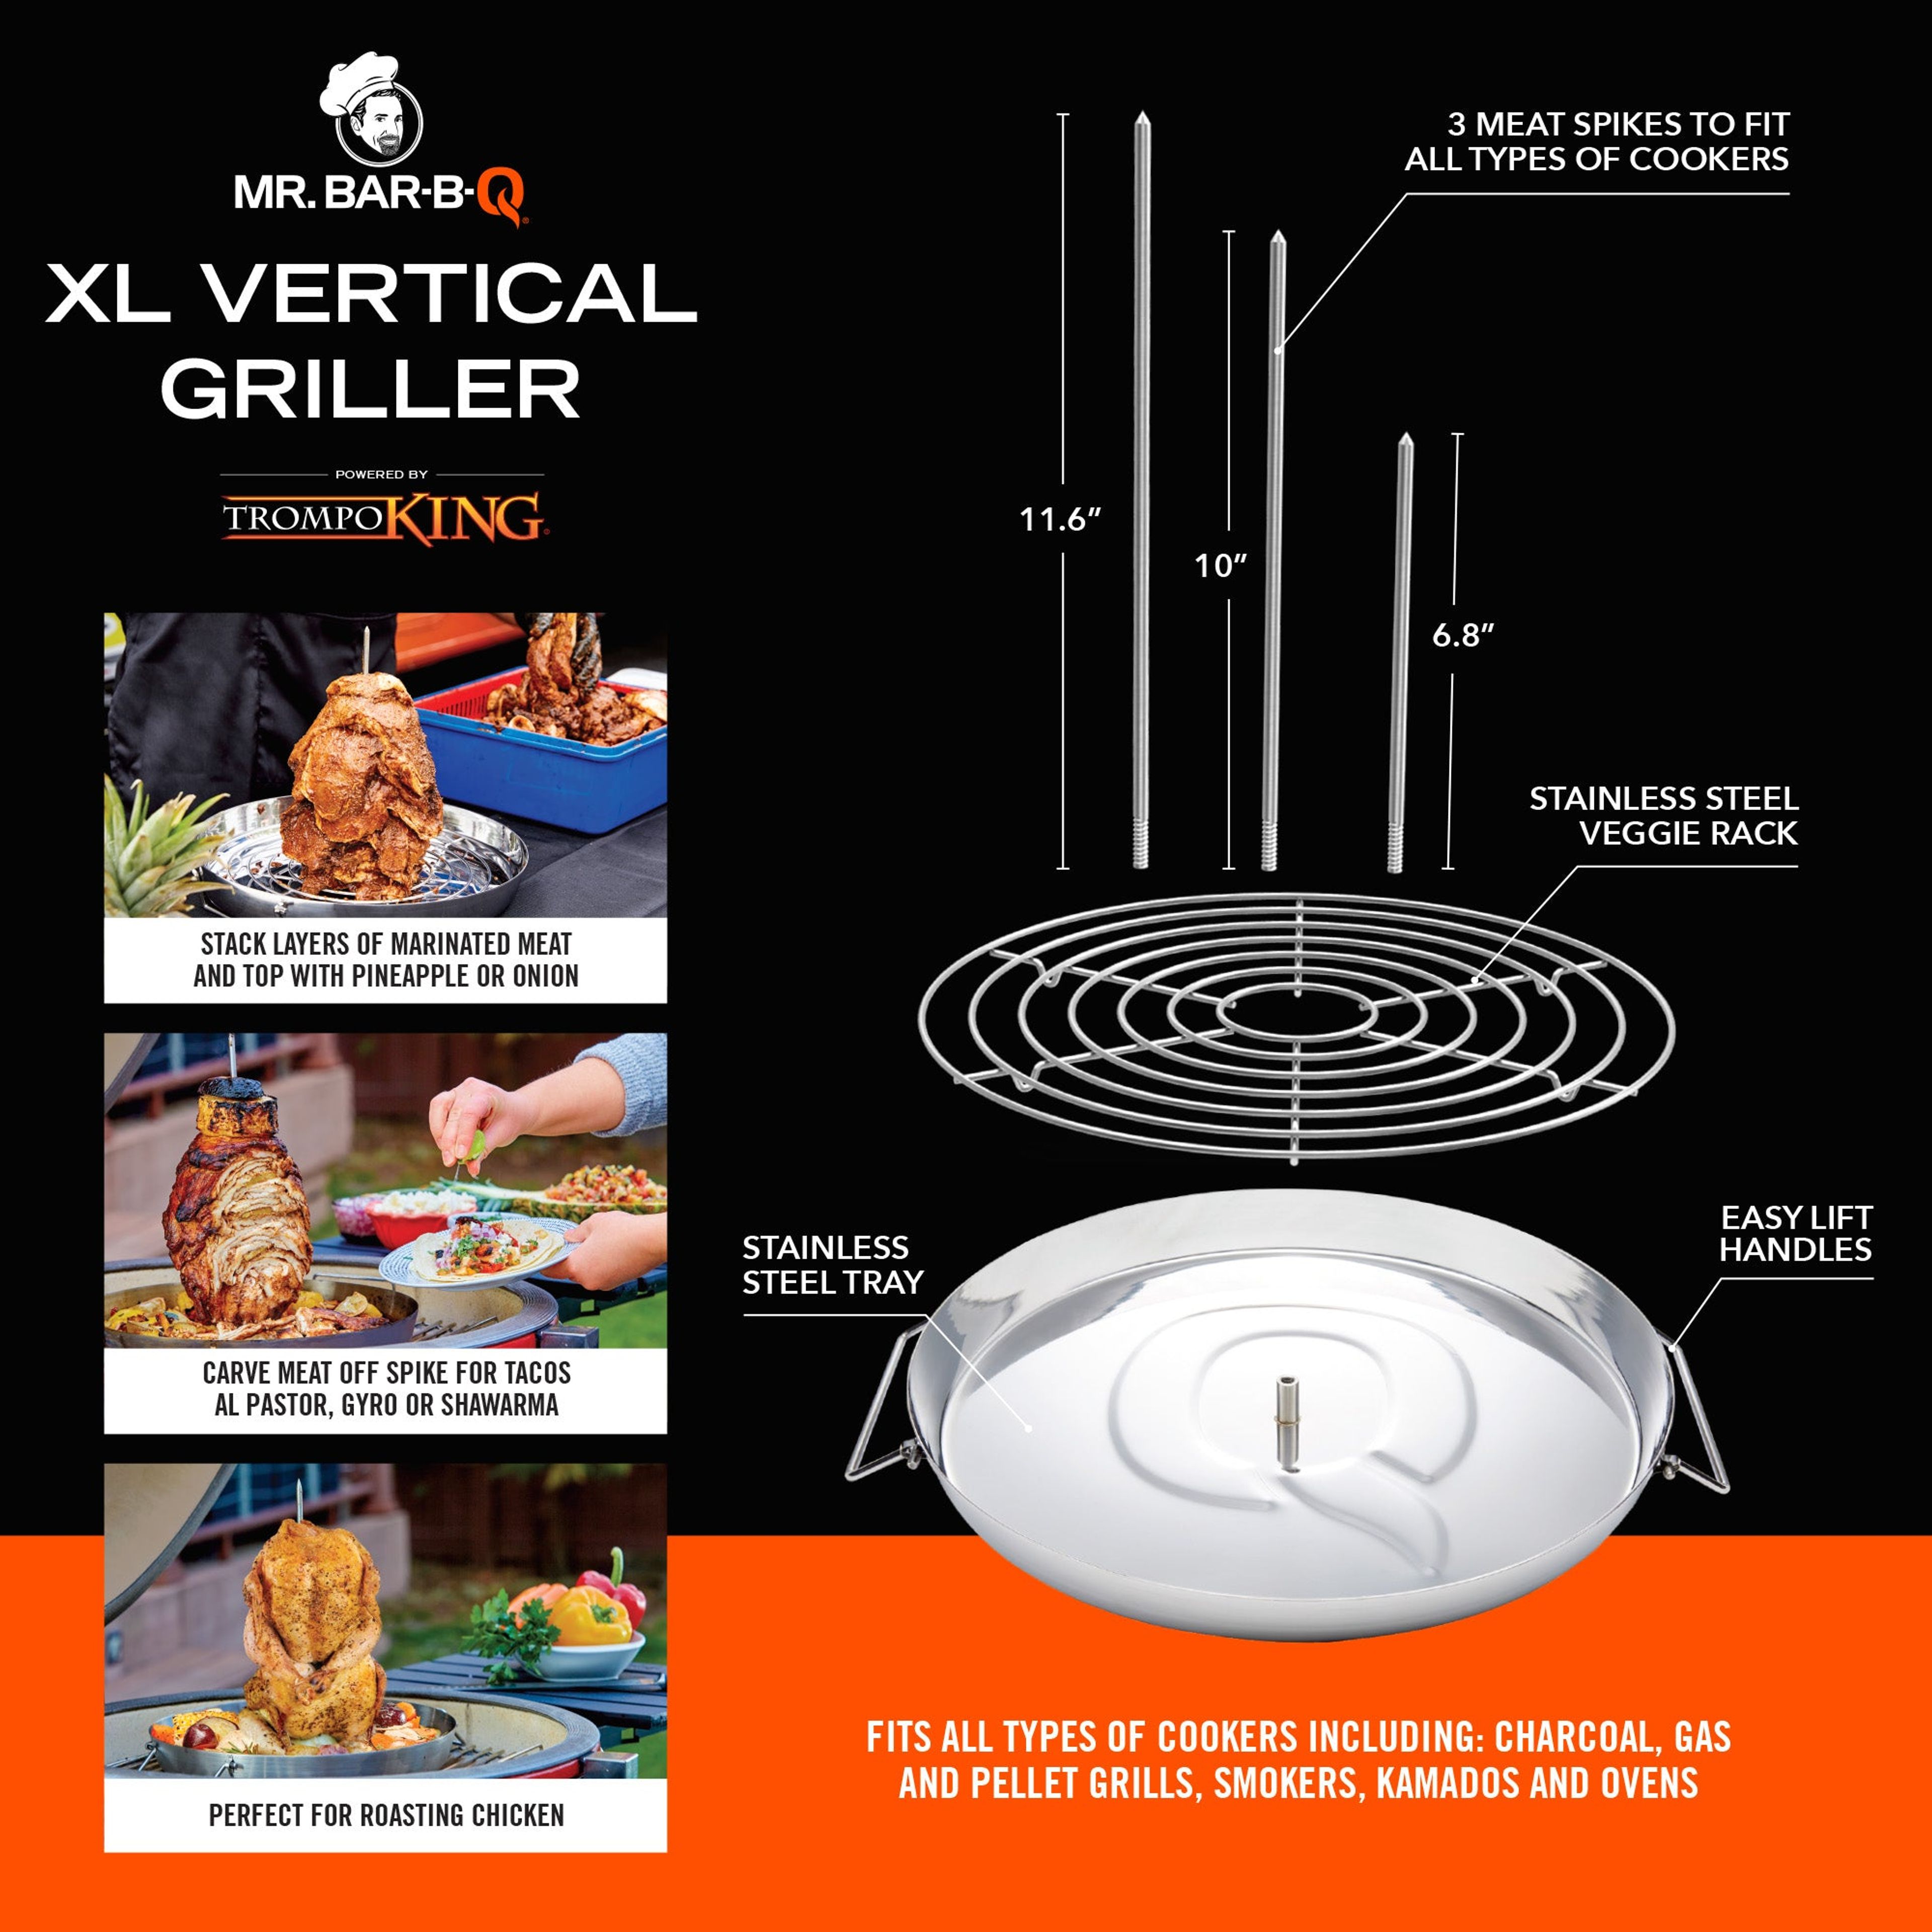 XL Trompo King Vertical Griller with Grate by Mr. Bar-B-Q